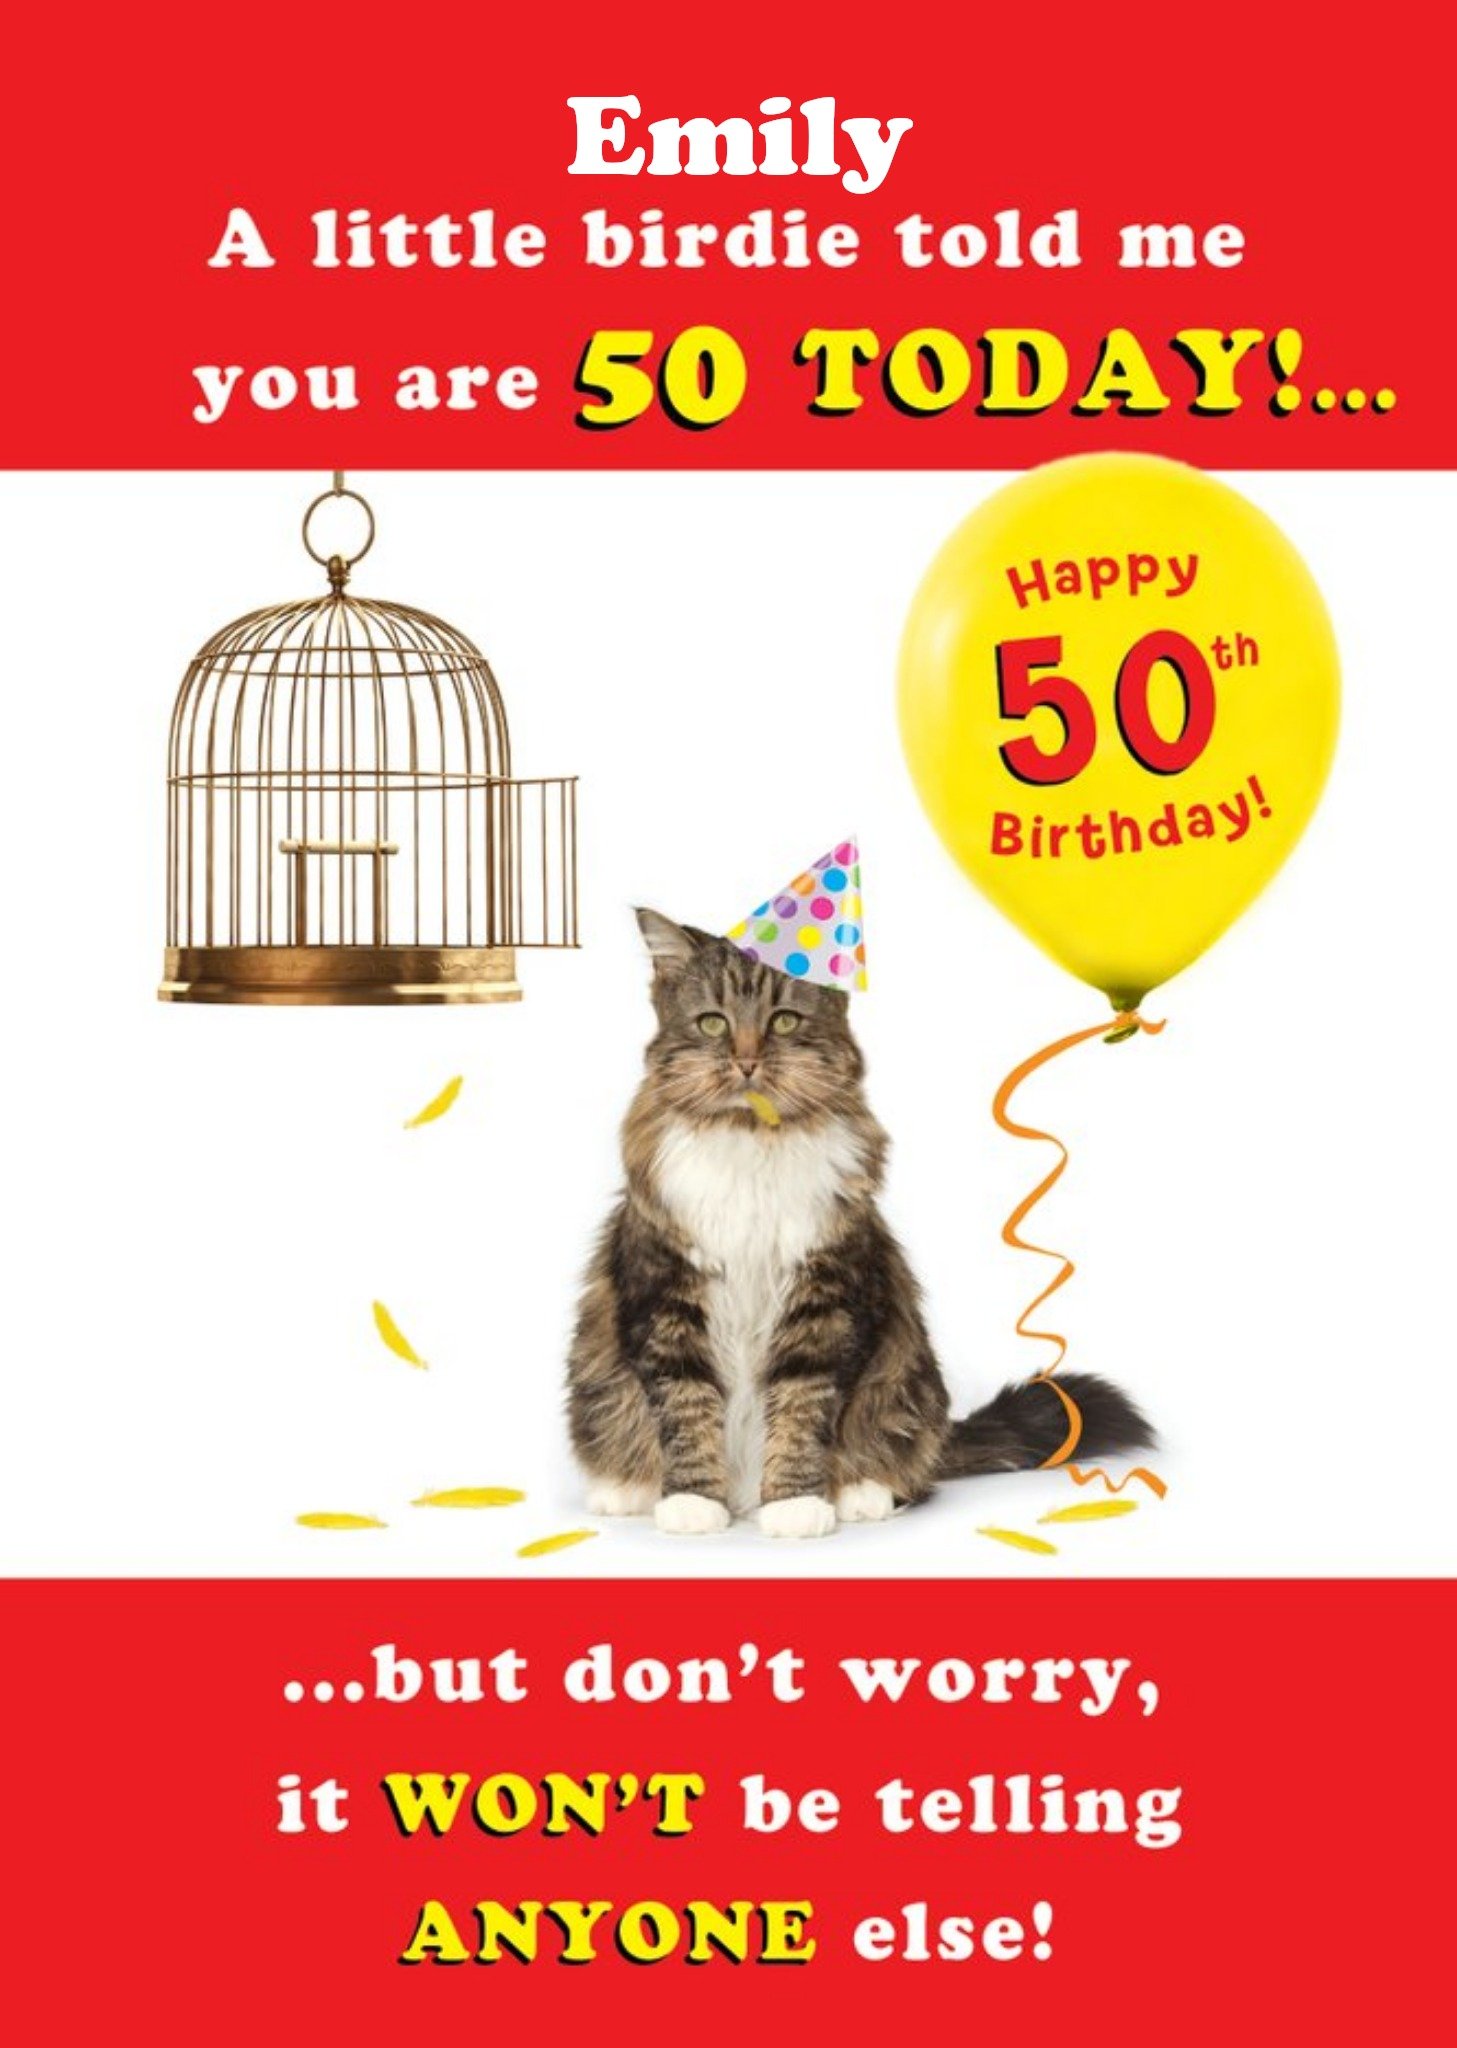 Moonpig A Little Birdie Told Me Personalised Happy 50th Birthday Card, Large